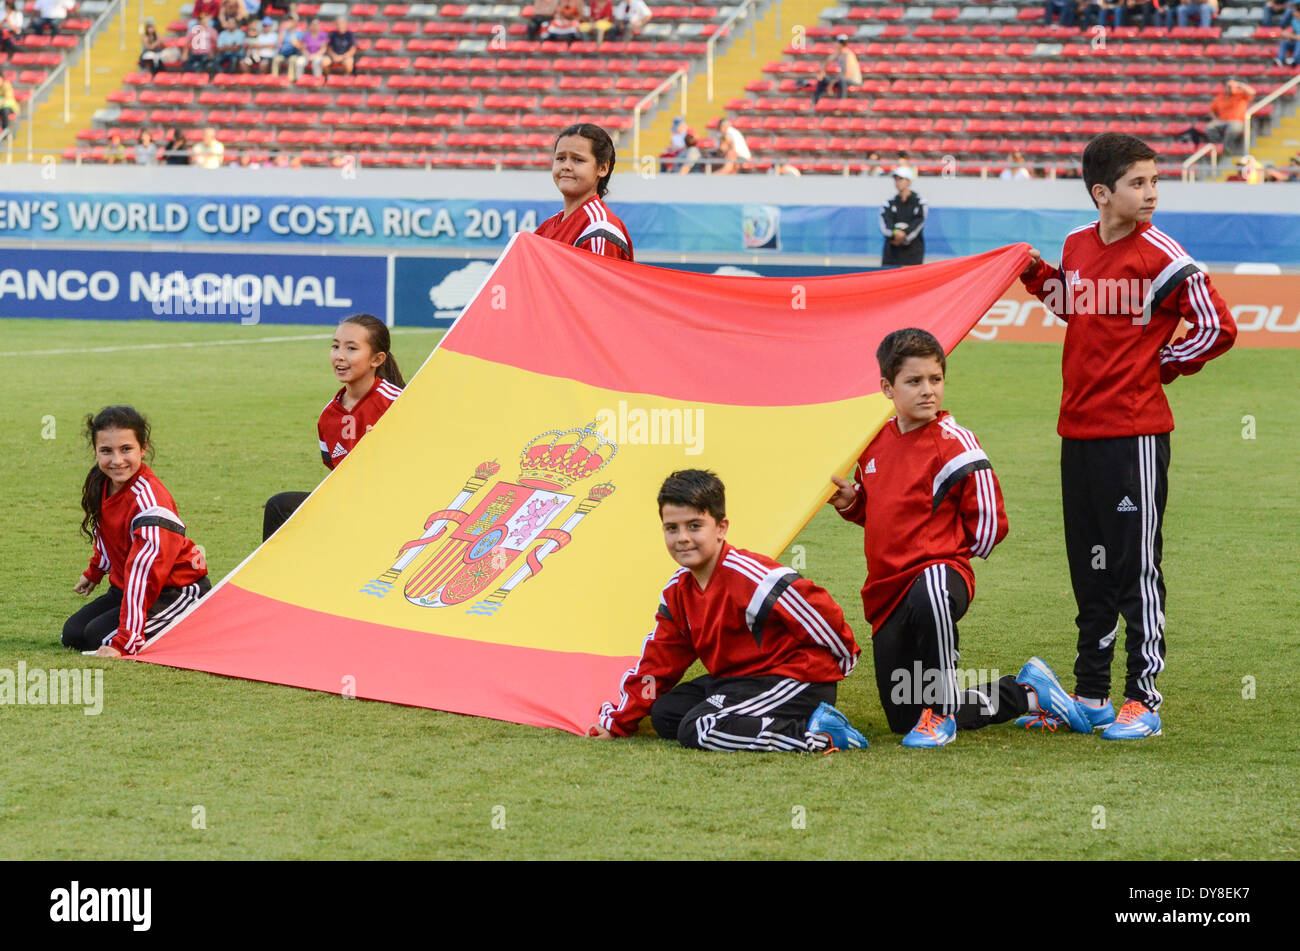 Children holding Spain flag in National Stadium pitch Stock Photo